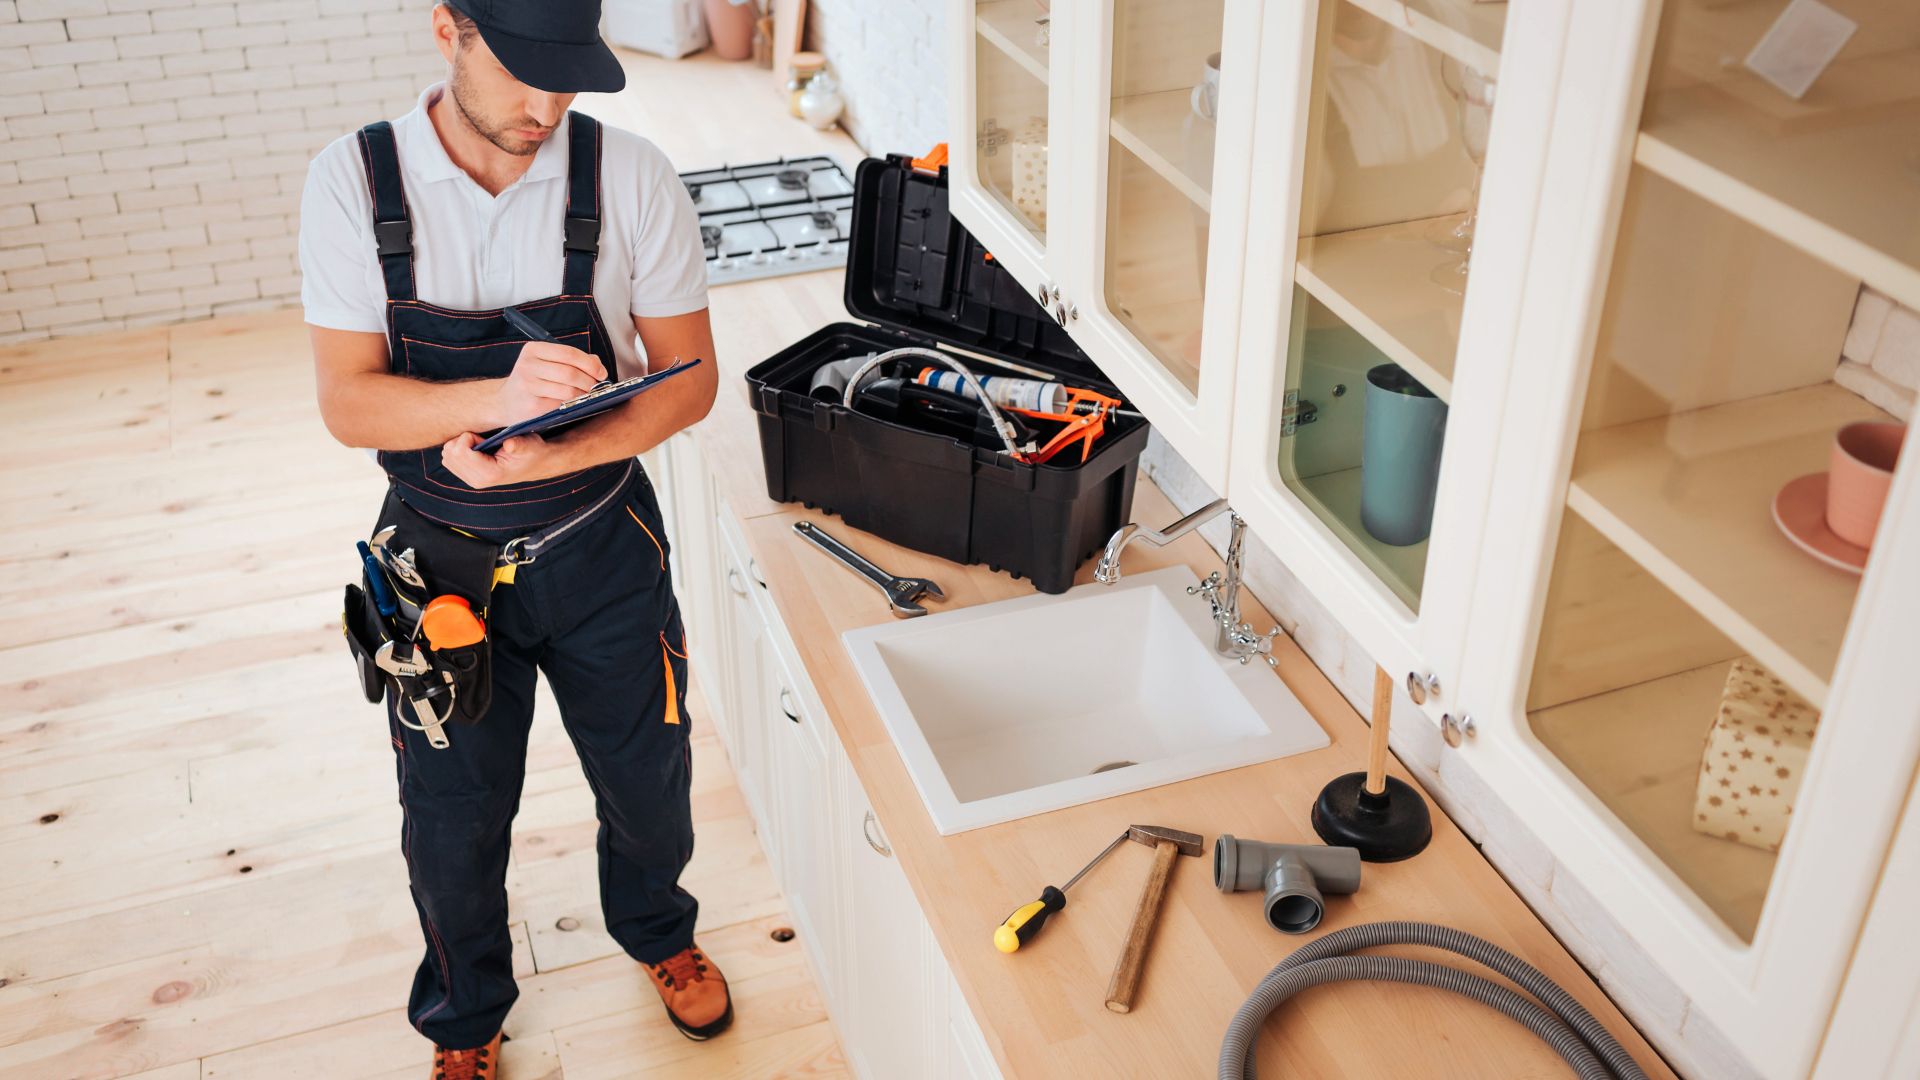 Plumbing for Kitchen Remodels by Skilled Plumbers